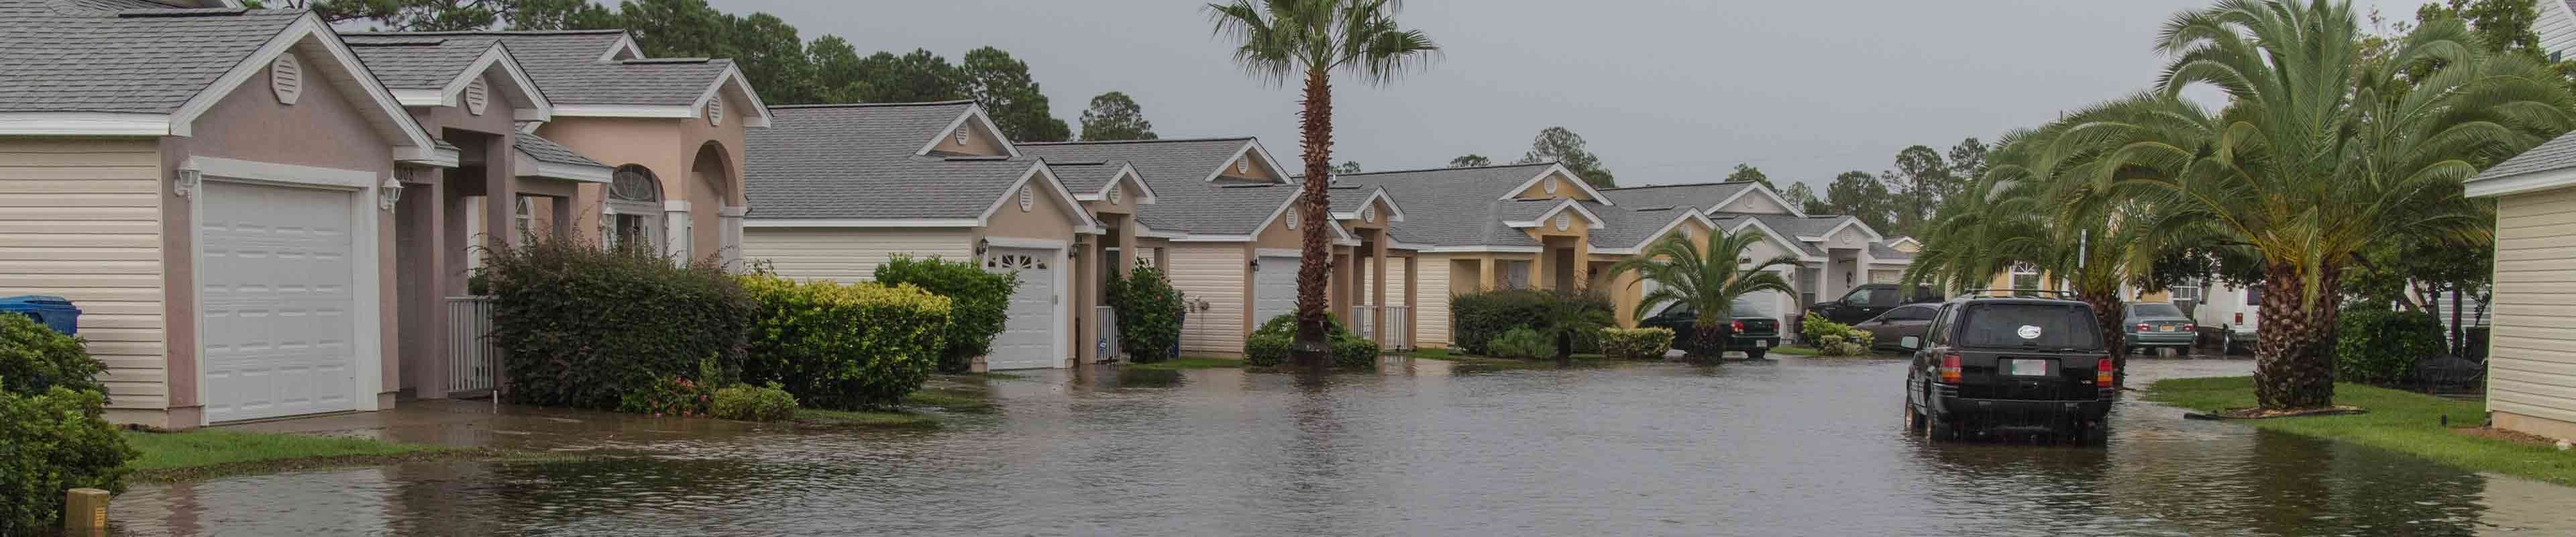 A row of houses with flooded basements in a neighborhood impacted by a heavy rainstorm.